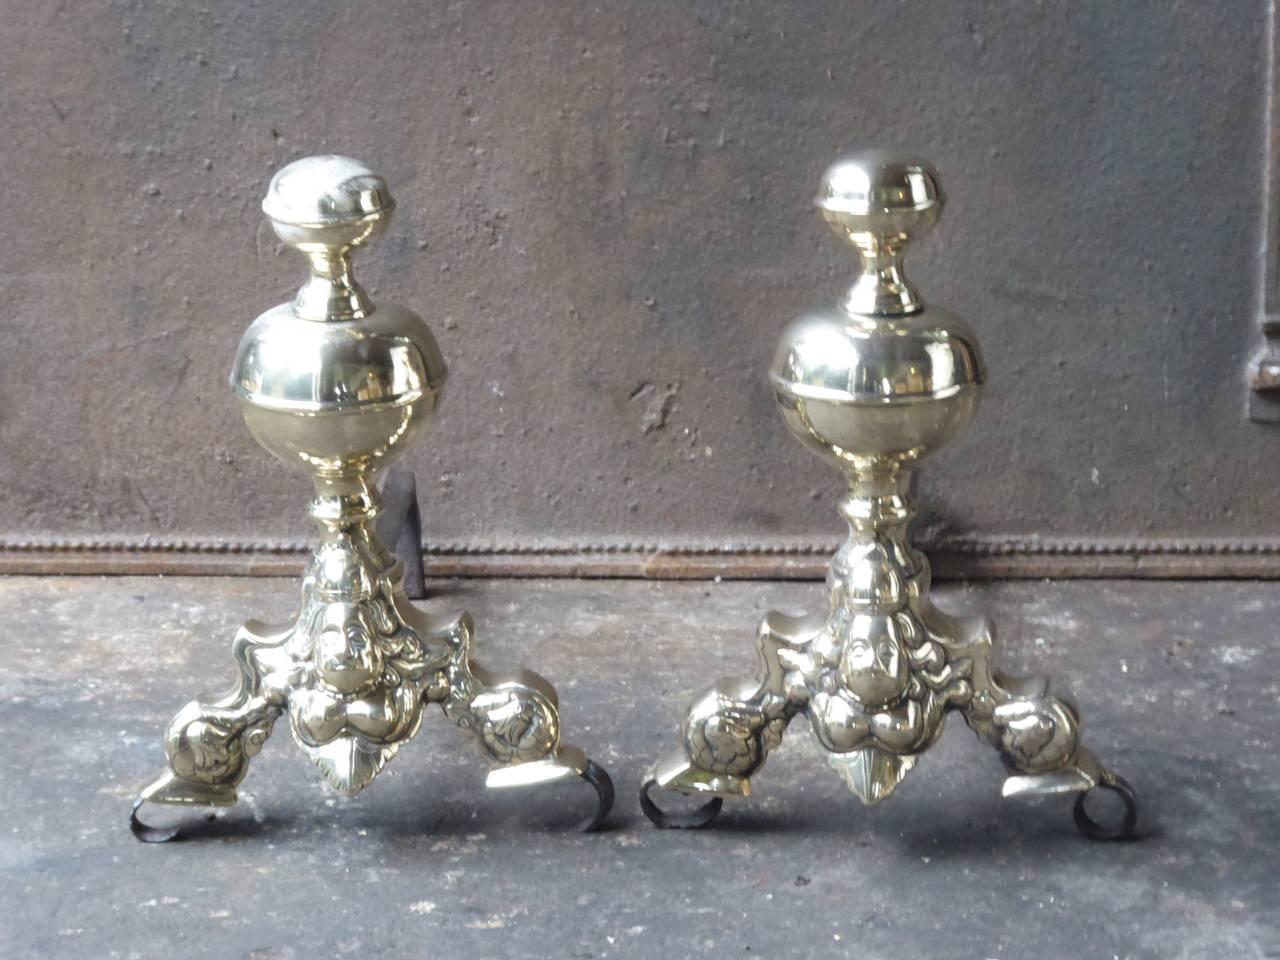 17th century Louis XIV fire dogs made of polished brass and wrought iron.

We have a unique and specialized collection of antique and used fireplace accessories consisting of more than 1000 listings at 1stdibs. Amongst others, we always have 300+